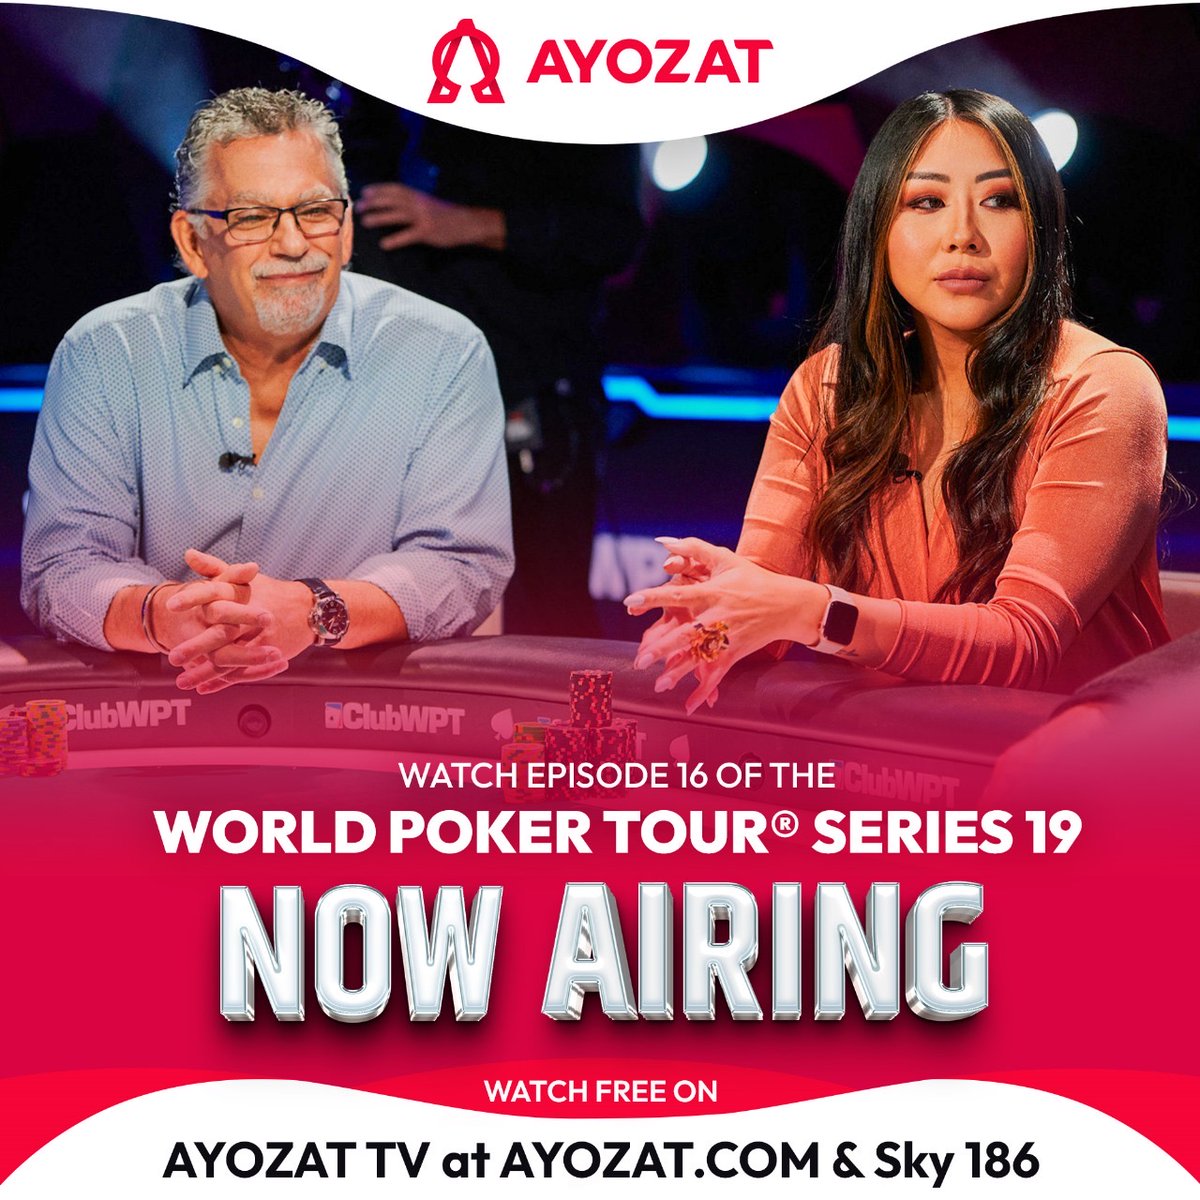 It's poker time! Episode 16 of the World Poker Tour® Series 19 is now airing on AYOZAT TV at Sky 186 and ayozat.com. Join us for high-stakes action and intense showdowns as players compete for the ultimate prize. #poker #worldpokertour #wpt #wptseries19 @WPT